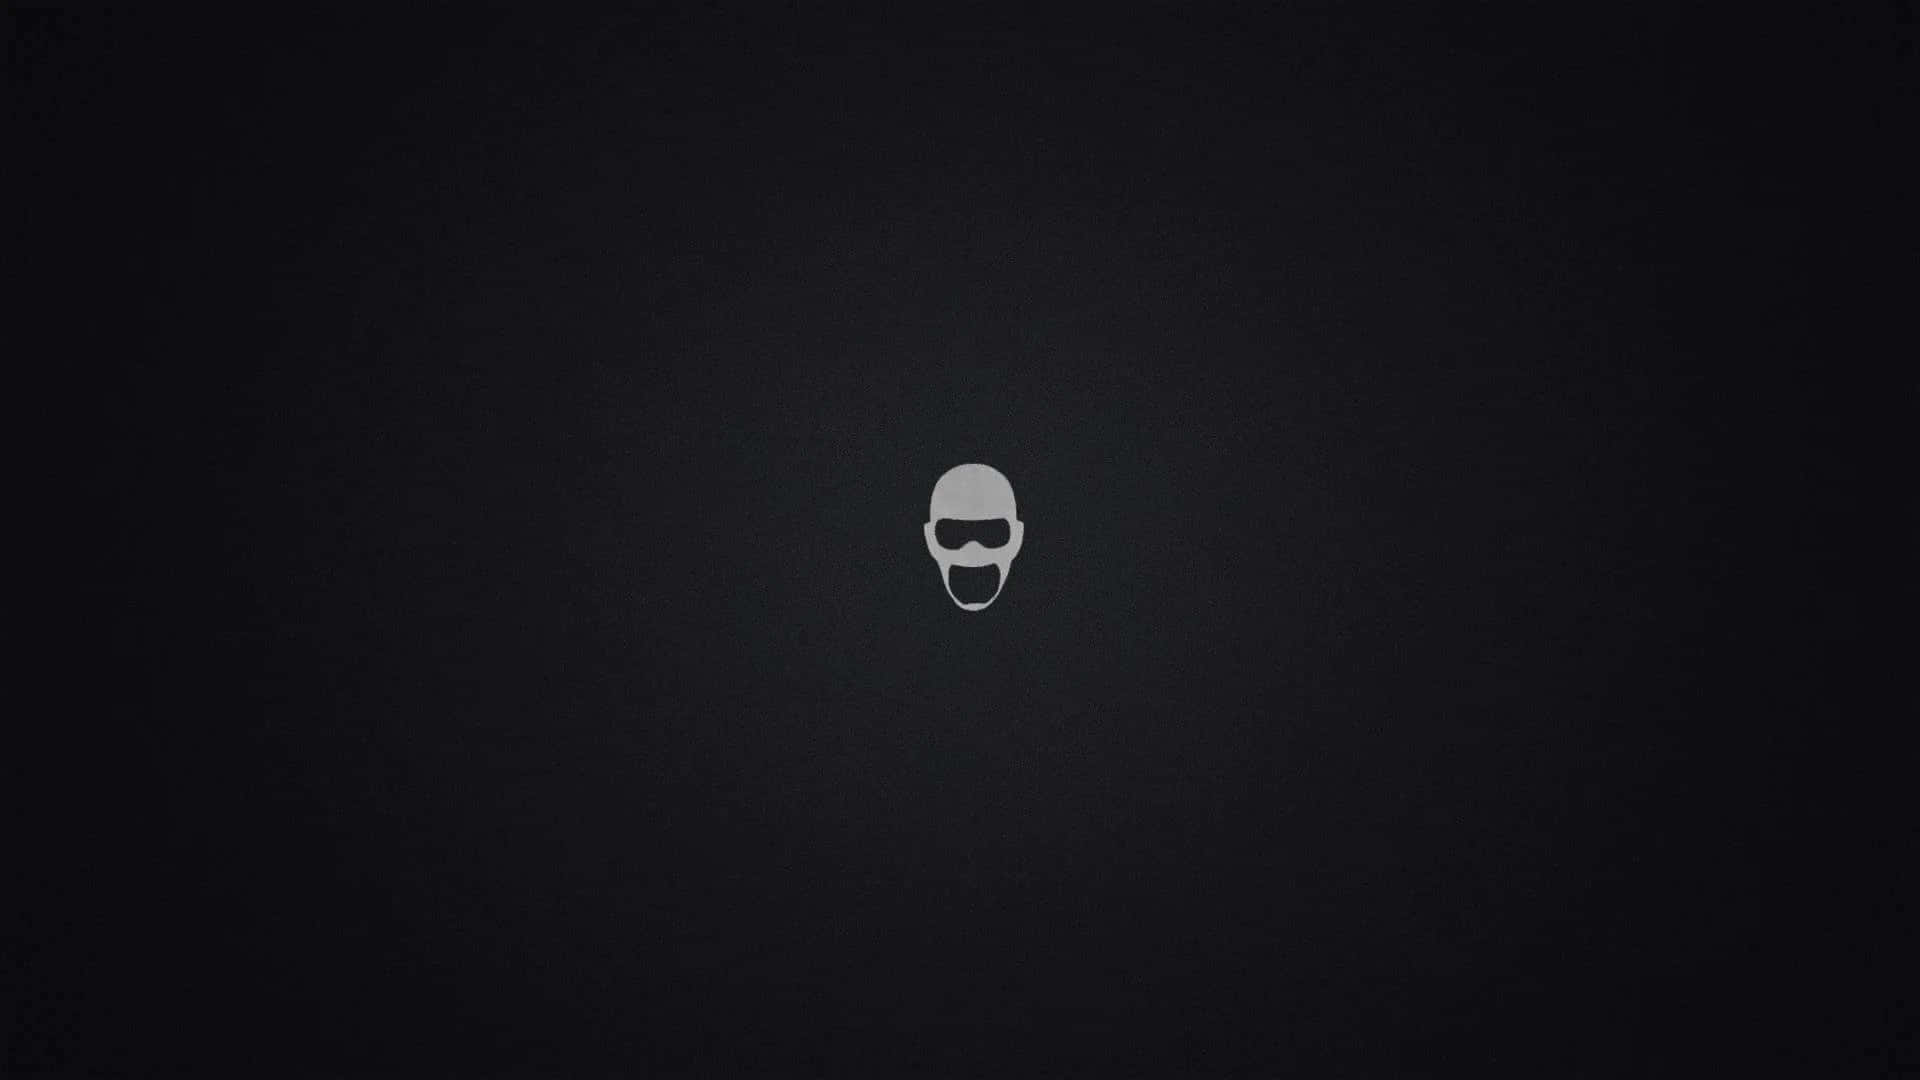 A Black Background With A White Skull On It